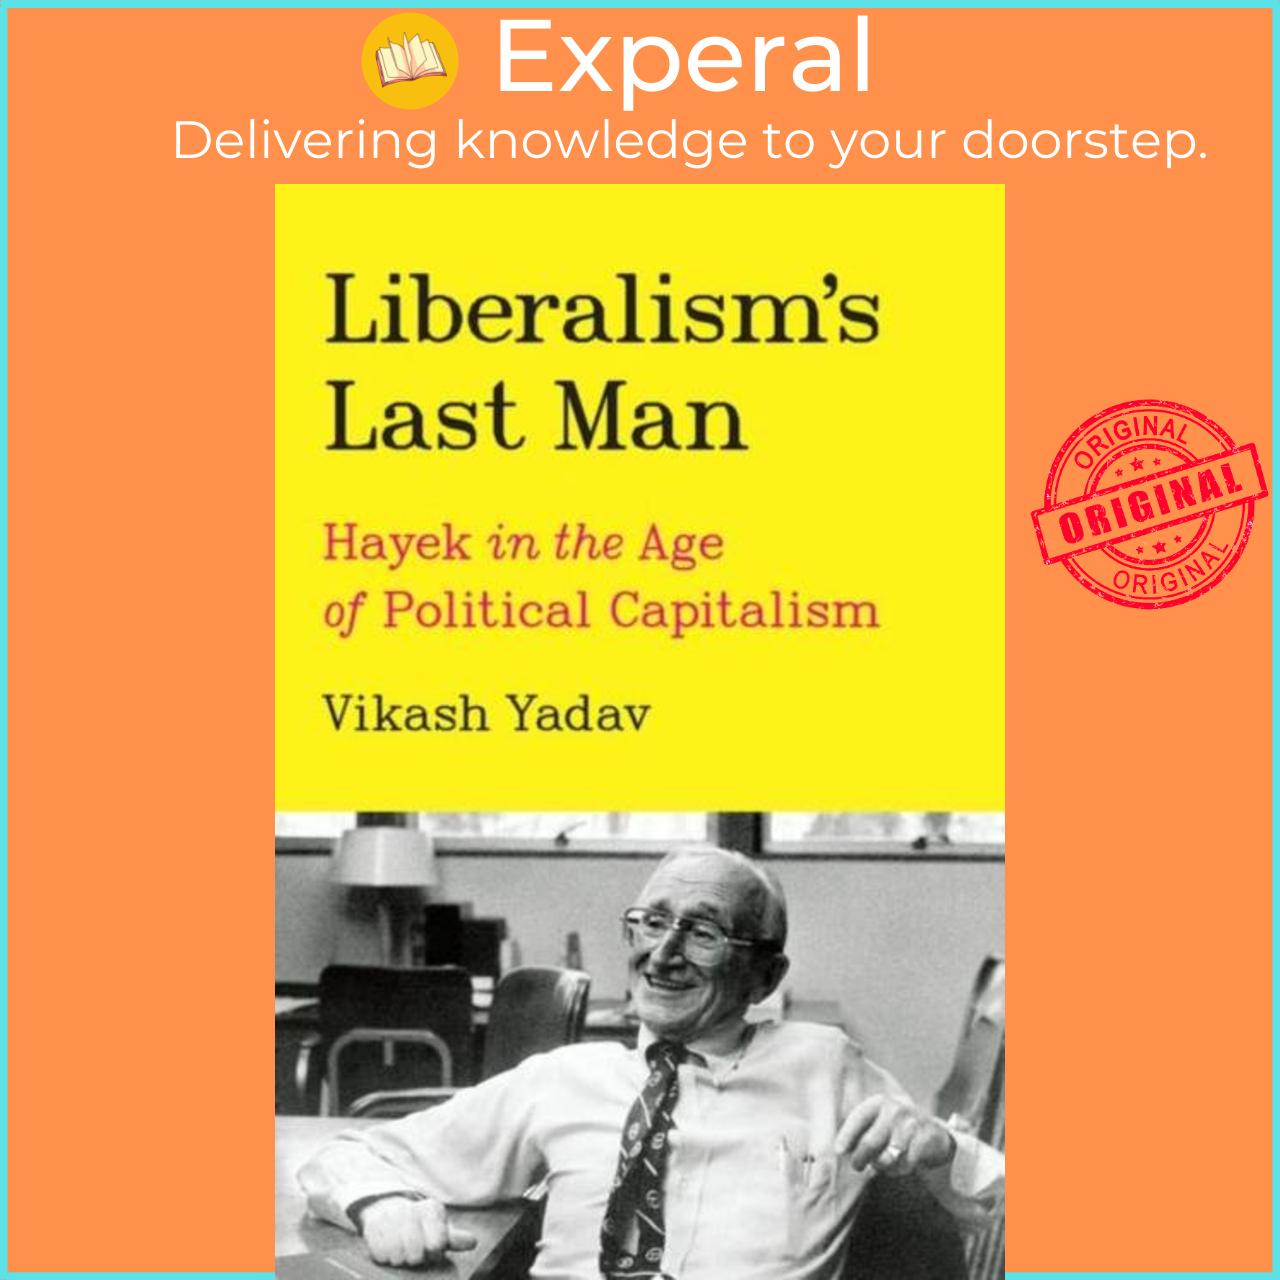 Sách - Liberalism's Last Man - Hayek in the Age of Political Capitalism by Vikash Yadav (UK edition, hardcover)